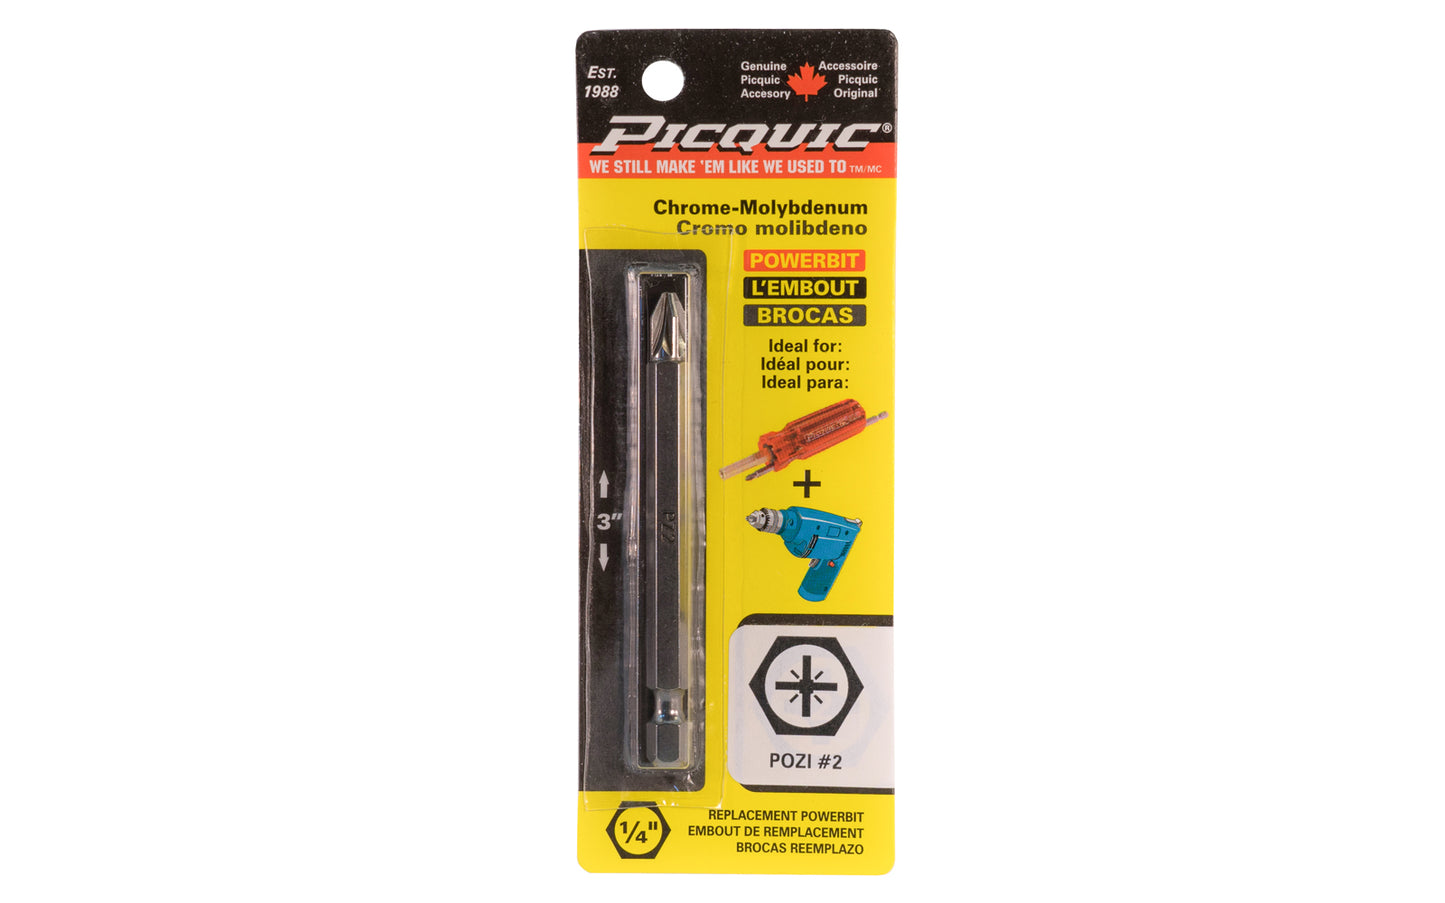 Picquic 3" length powerbit - #2 Pozi Drive Bit. 1/4" hex shank power bits ideal for use in drills & impact drivers. Model 88032.